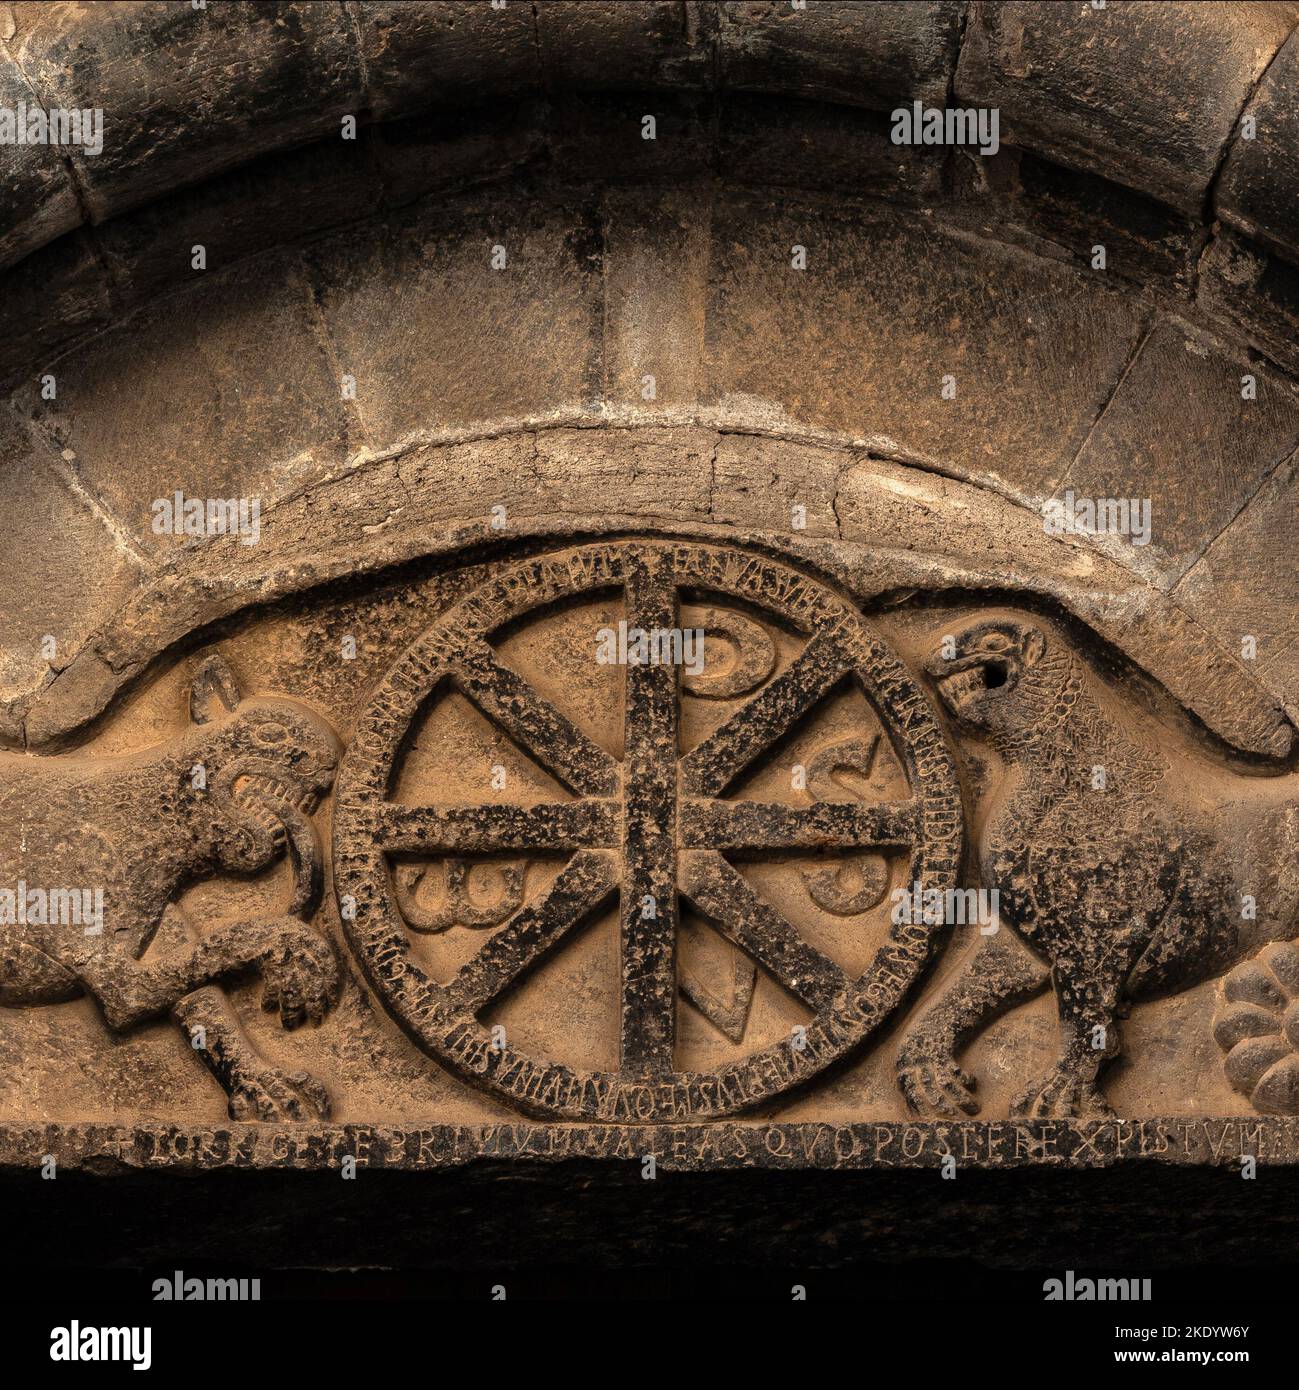 Snarling lions and Christian symbols.  Sculpted Romanesque tympanum over north portal of 11th century former Aragonese royal nunnery church of Santa Maria at Santa Cruz de la Serós in Huesca, Aragon, Spain.  It also features a Latin inscription urging the faithful to enter “this blessed temple of the Virgin”. Stock Photo